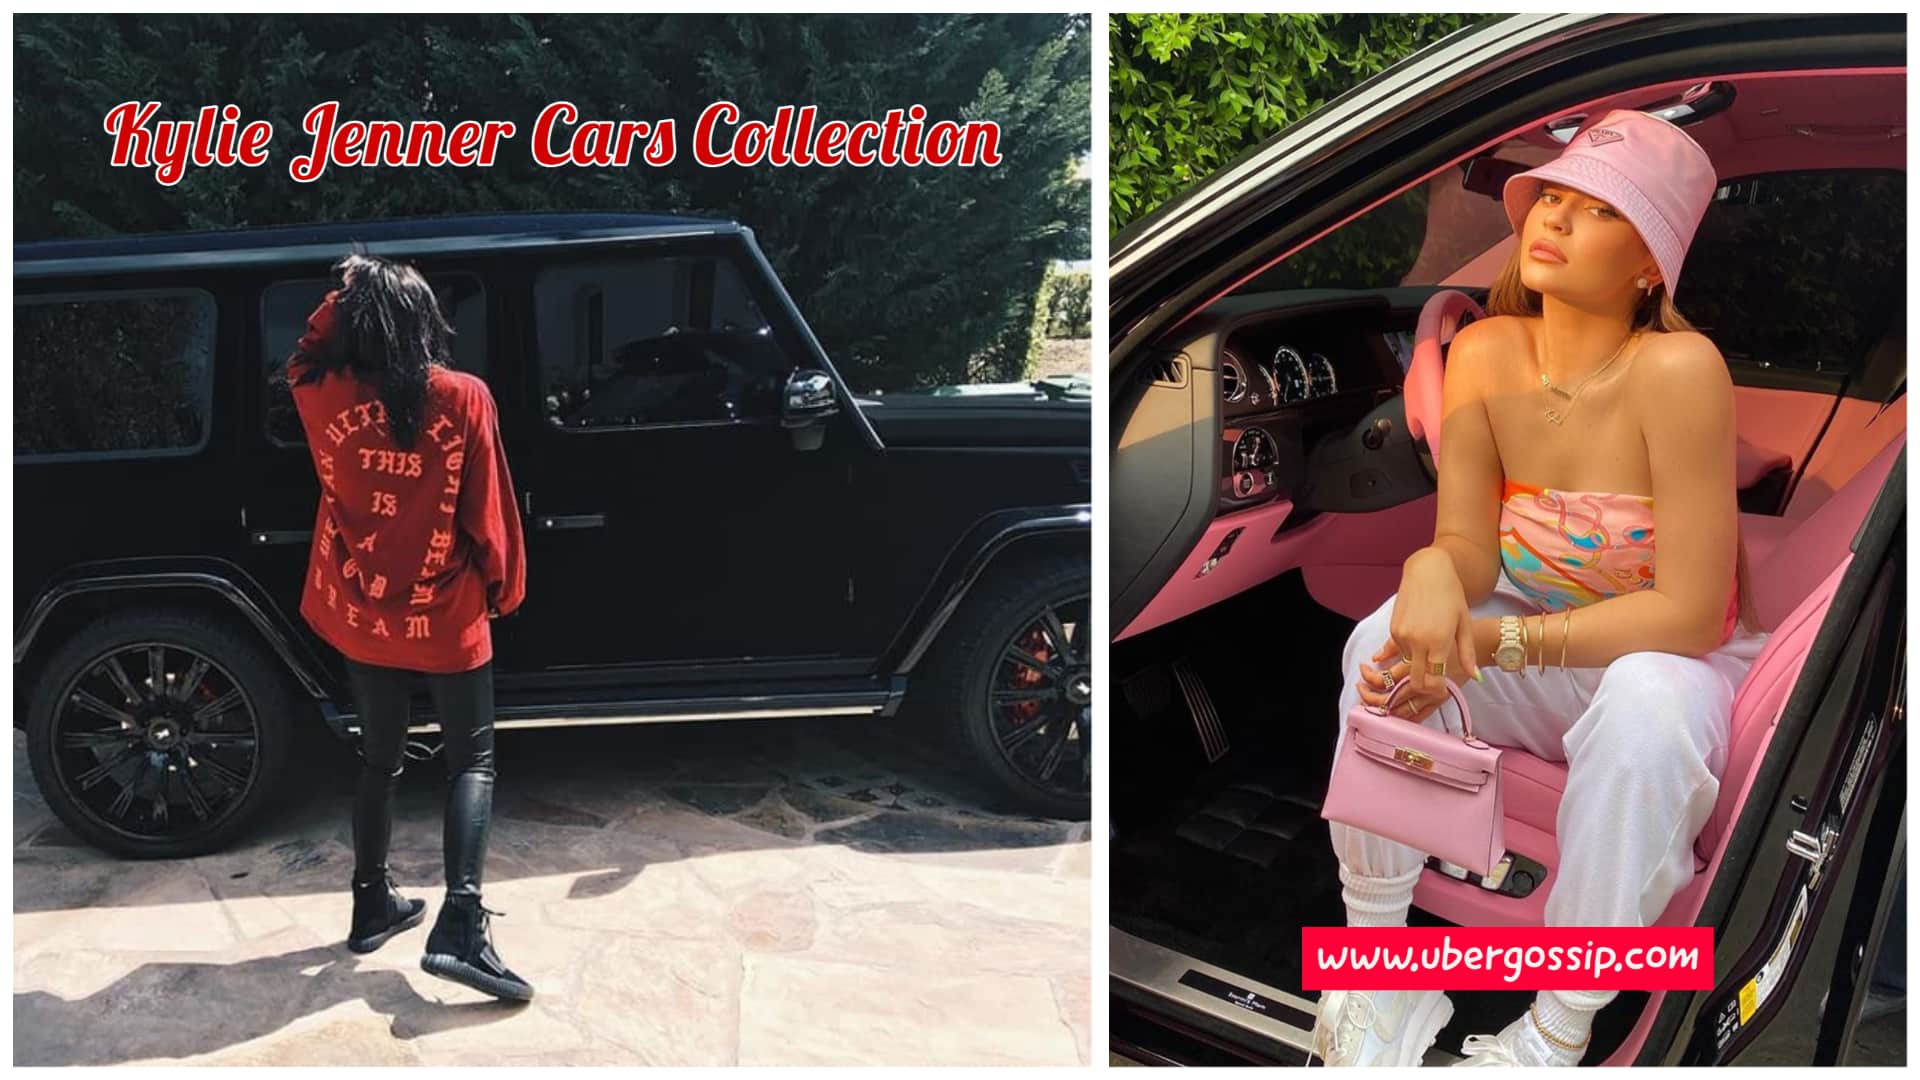 Celebrity Cars, how many cars does Kylie Jenner have, Kylie Jenner, Kylie Jenner car, Kylie Jenner Car Mercedes, Kylie Jenner Cars, Kylie Jenner Cars Collection, Kylie Jenner G Wagon, Kylies cars